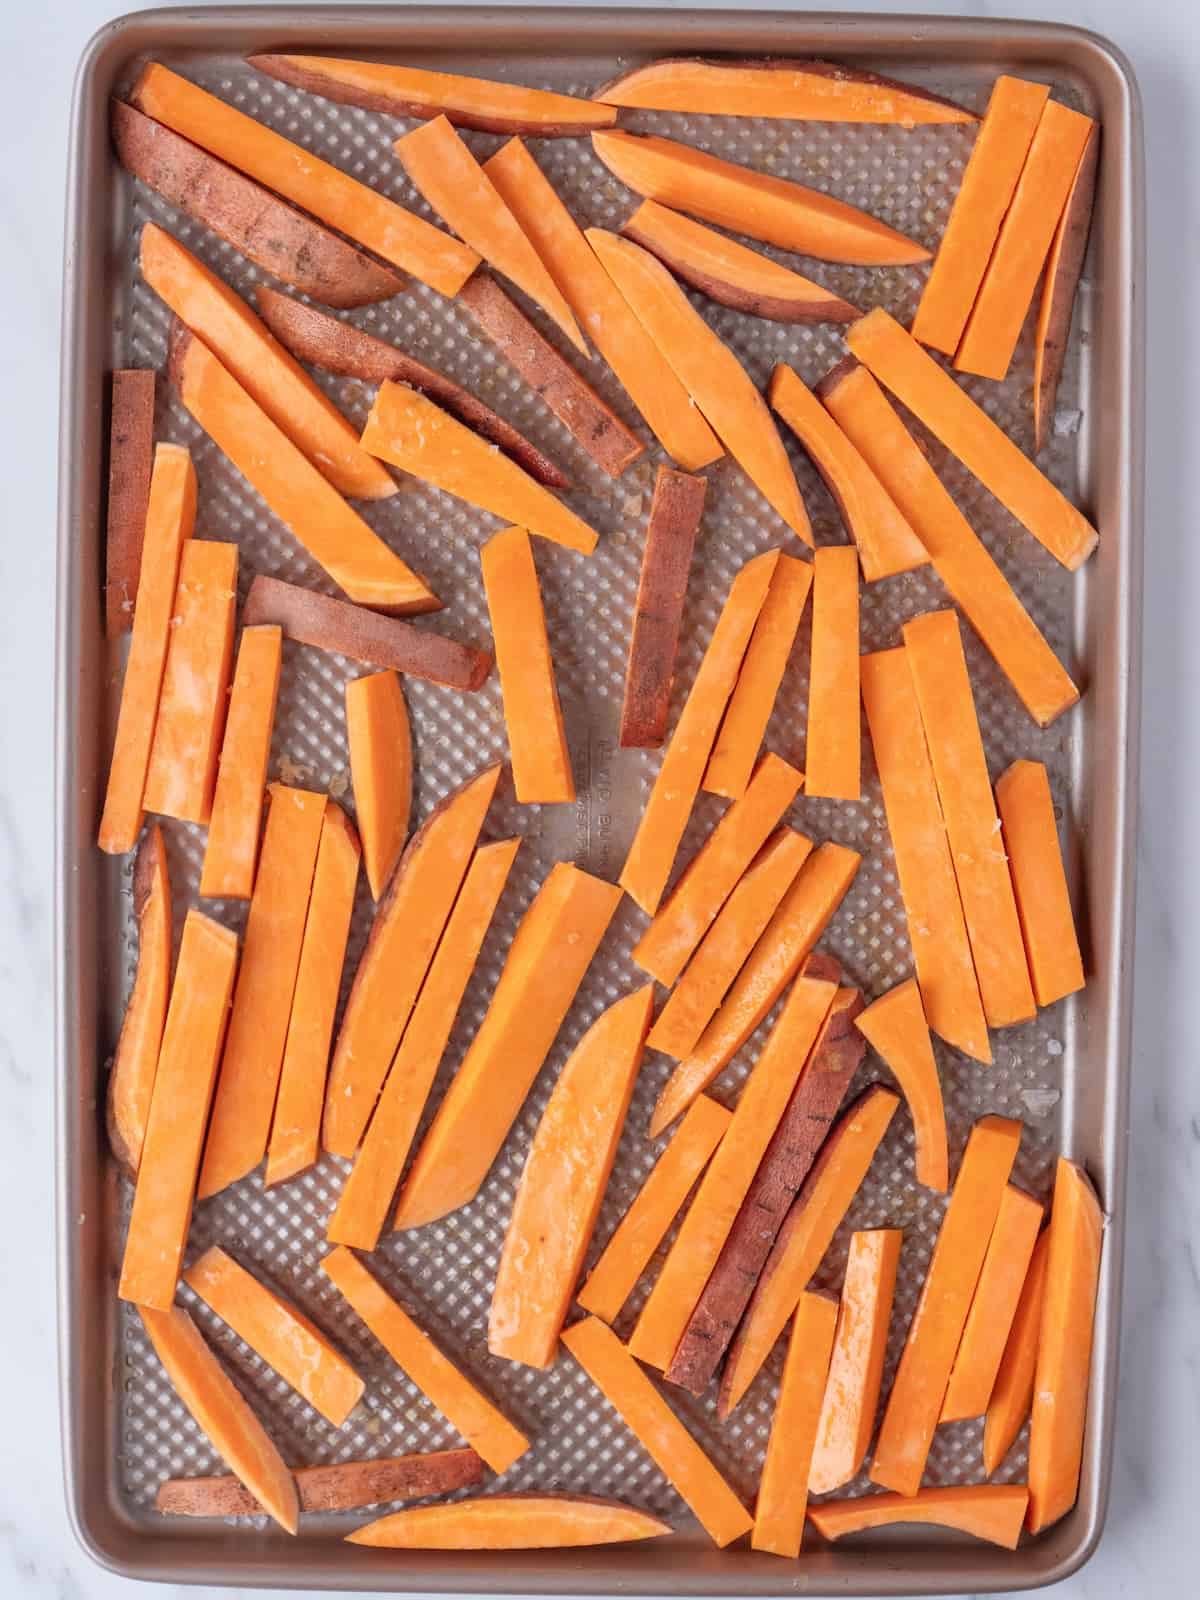 A baking sheet with unpeeled sweet potatoes cut length wise into batons about ¼ inch wide and 3 inches long.